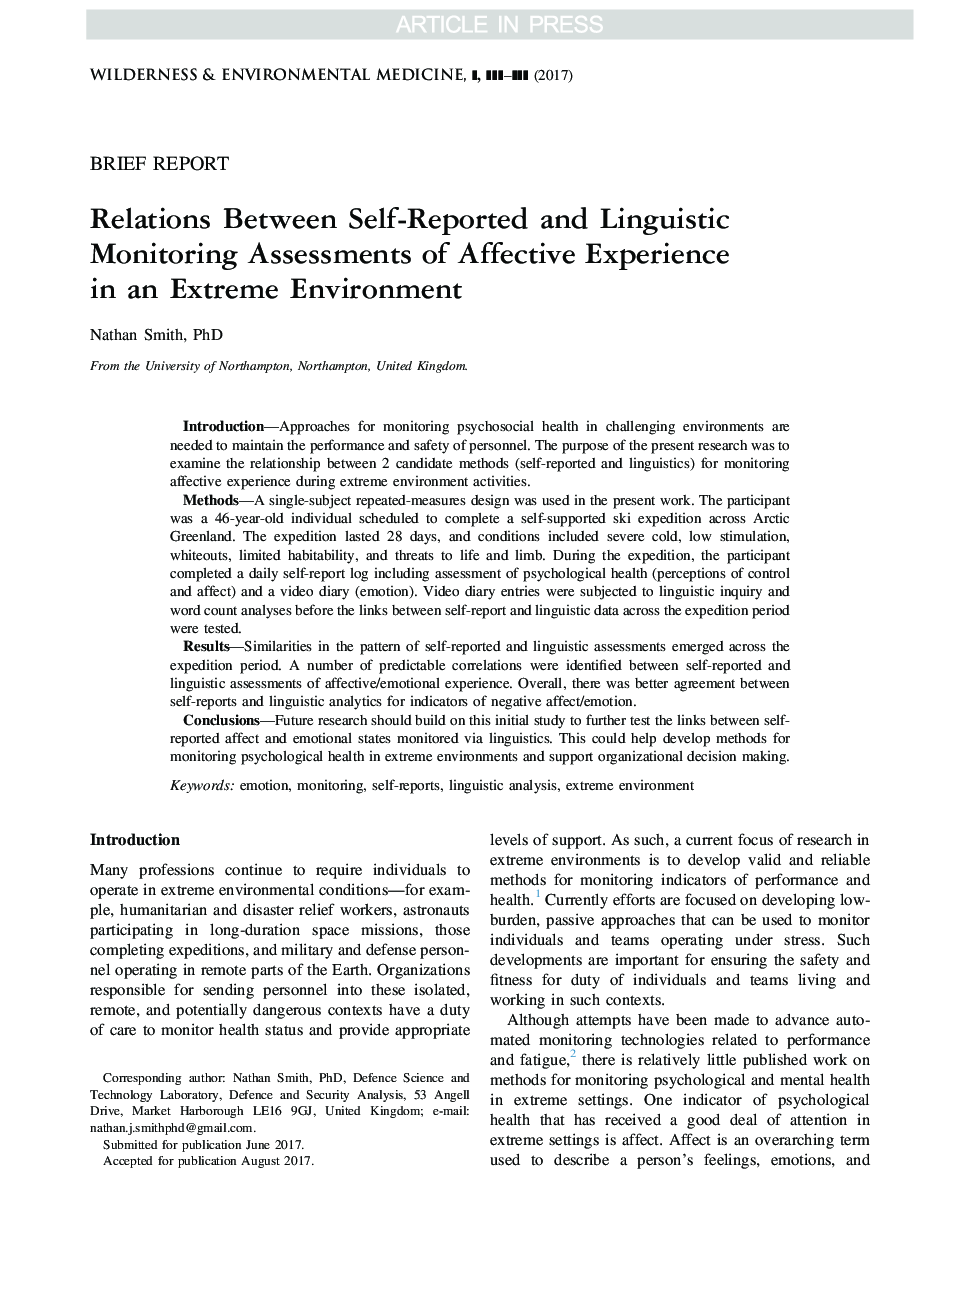 Relations Between Self-Reported and Linguistic Monitoring Assessments of Affective Experience in an Extreme Environment